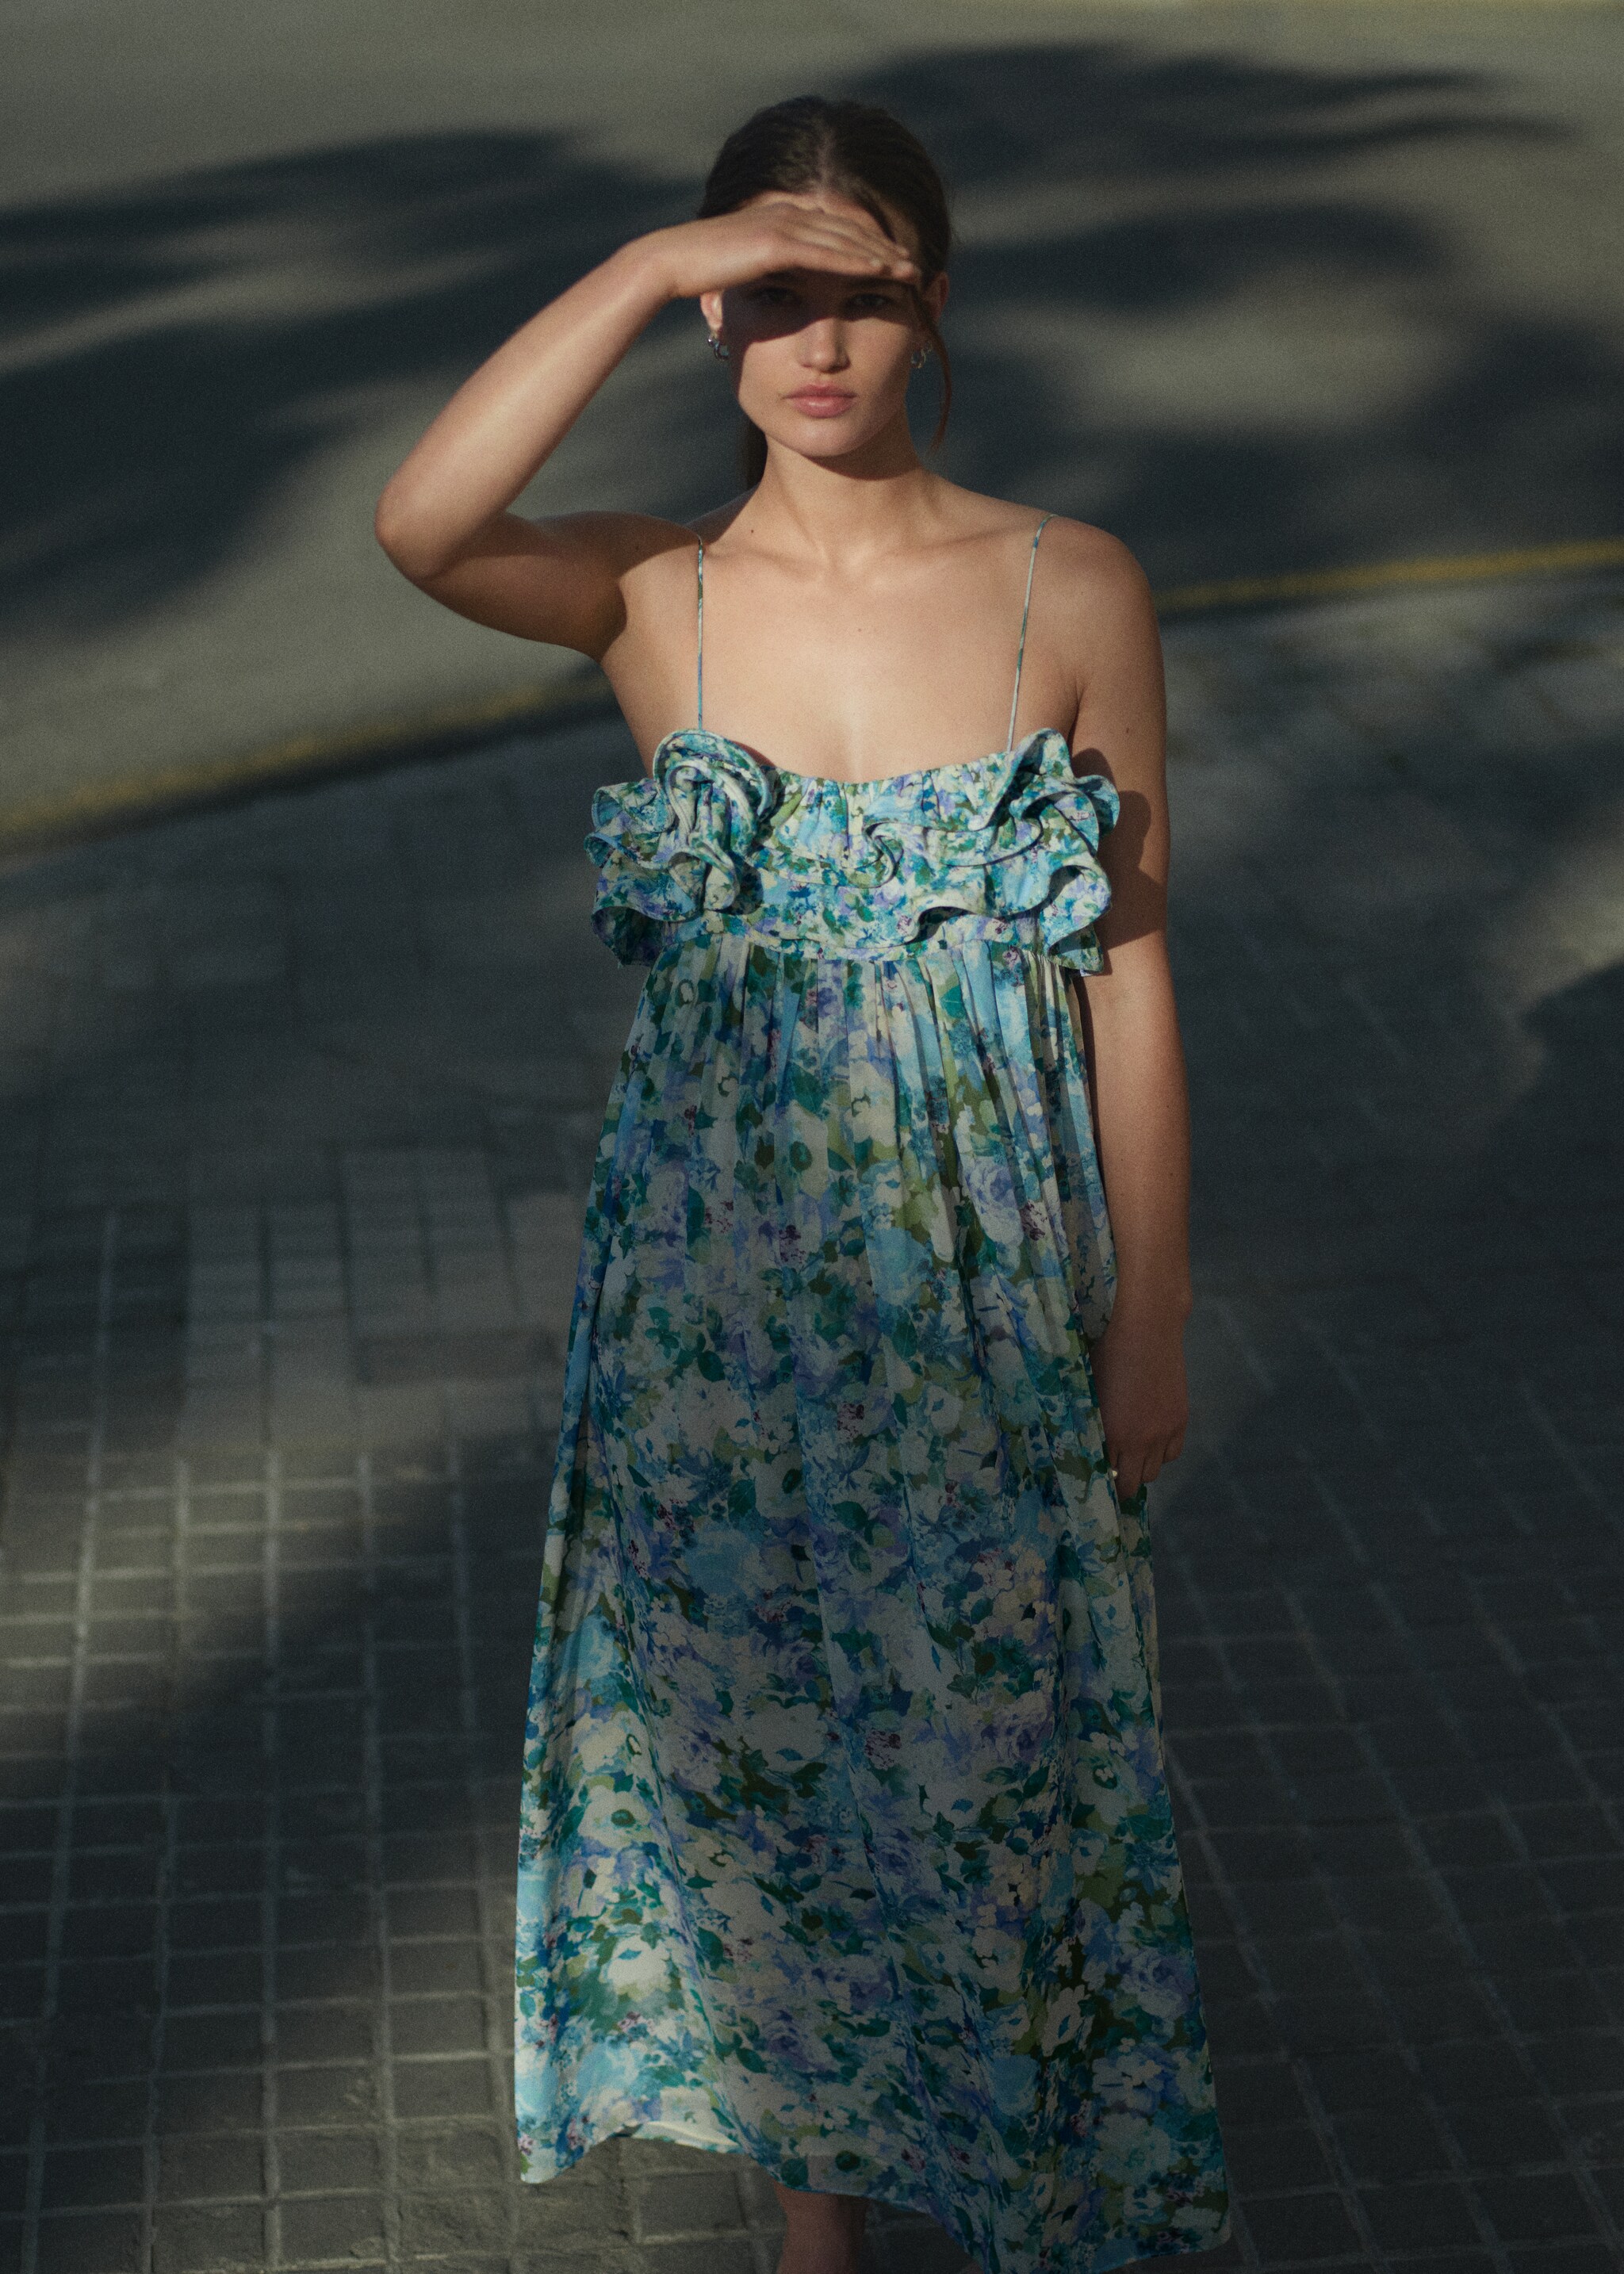 Floral ruffled dress - Details of the article 6